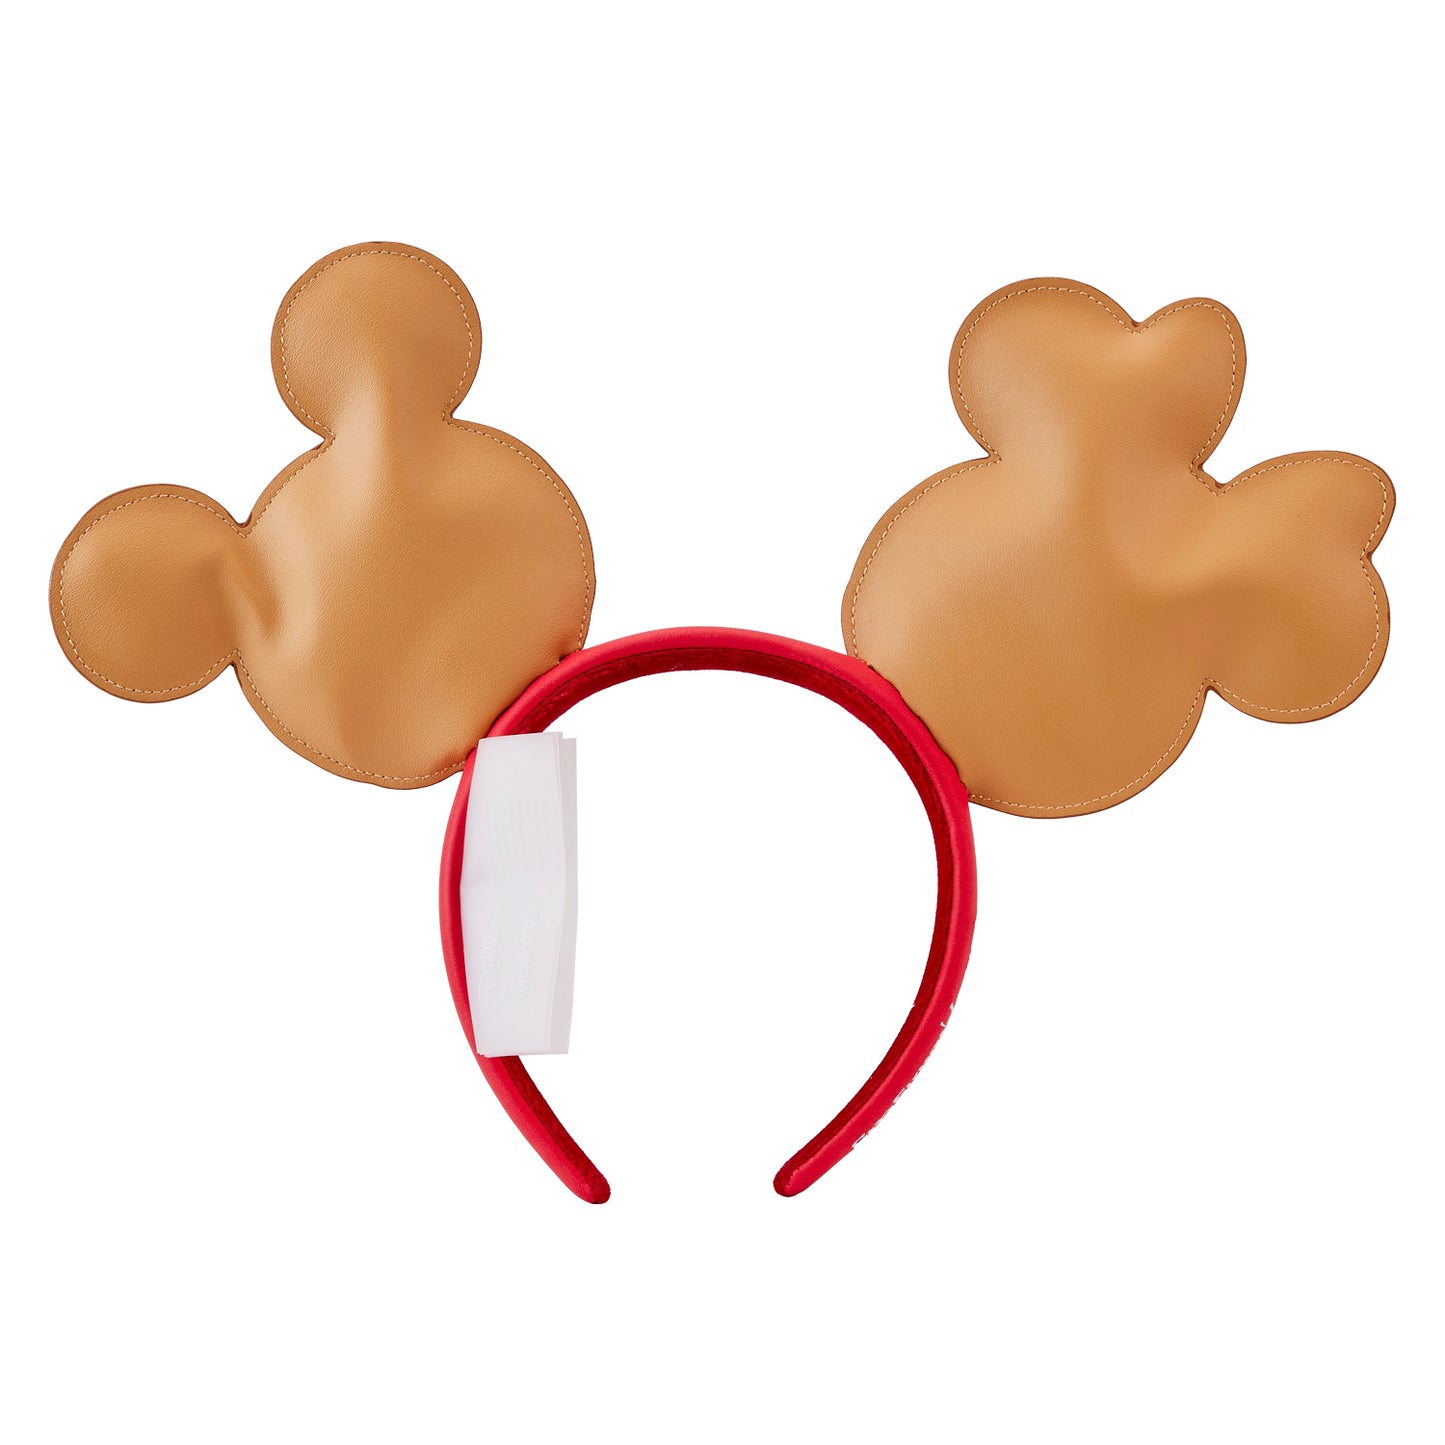 Loungefly Disney Mickey And Friends Gingerbread Cookie AOP Ear Holder Mini Backpack *PRE-ORDER ITEM*